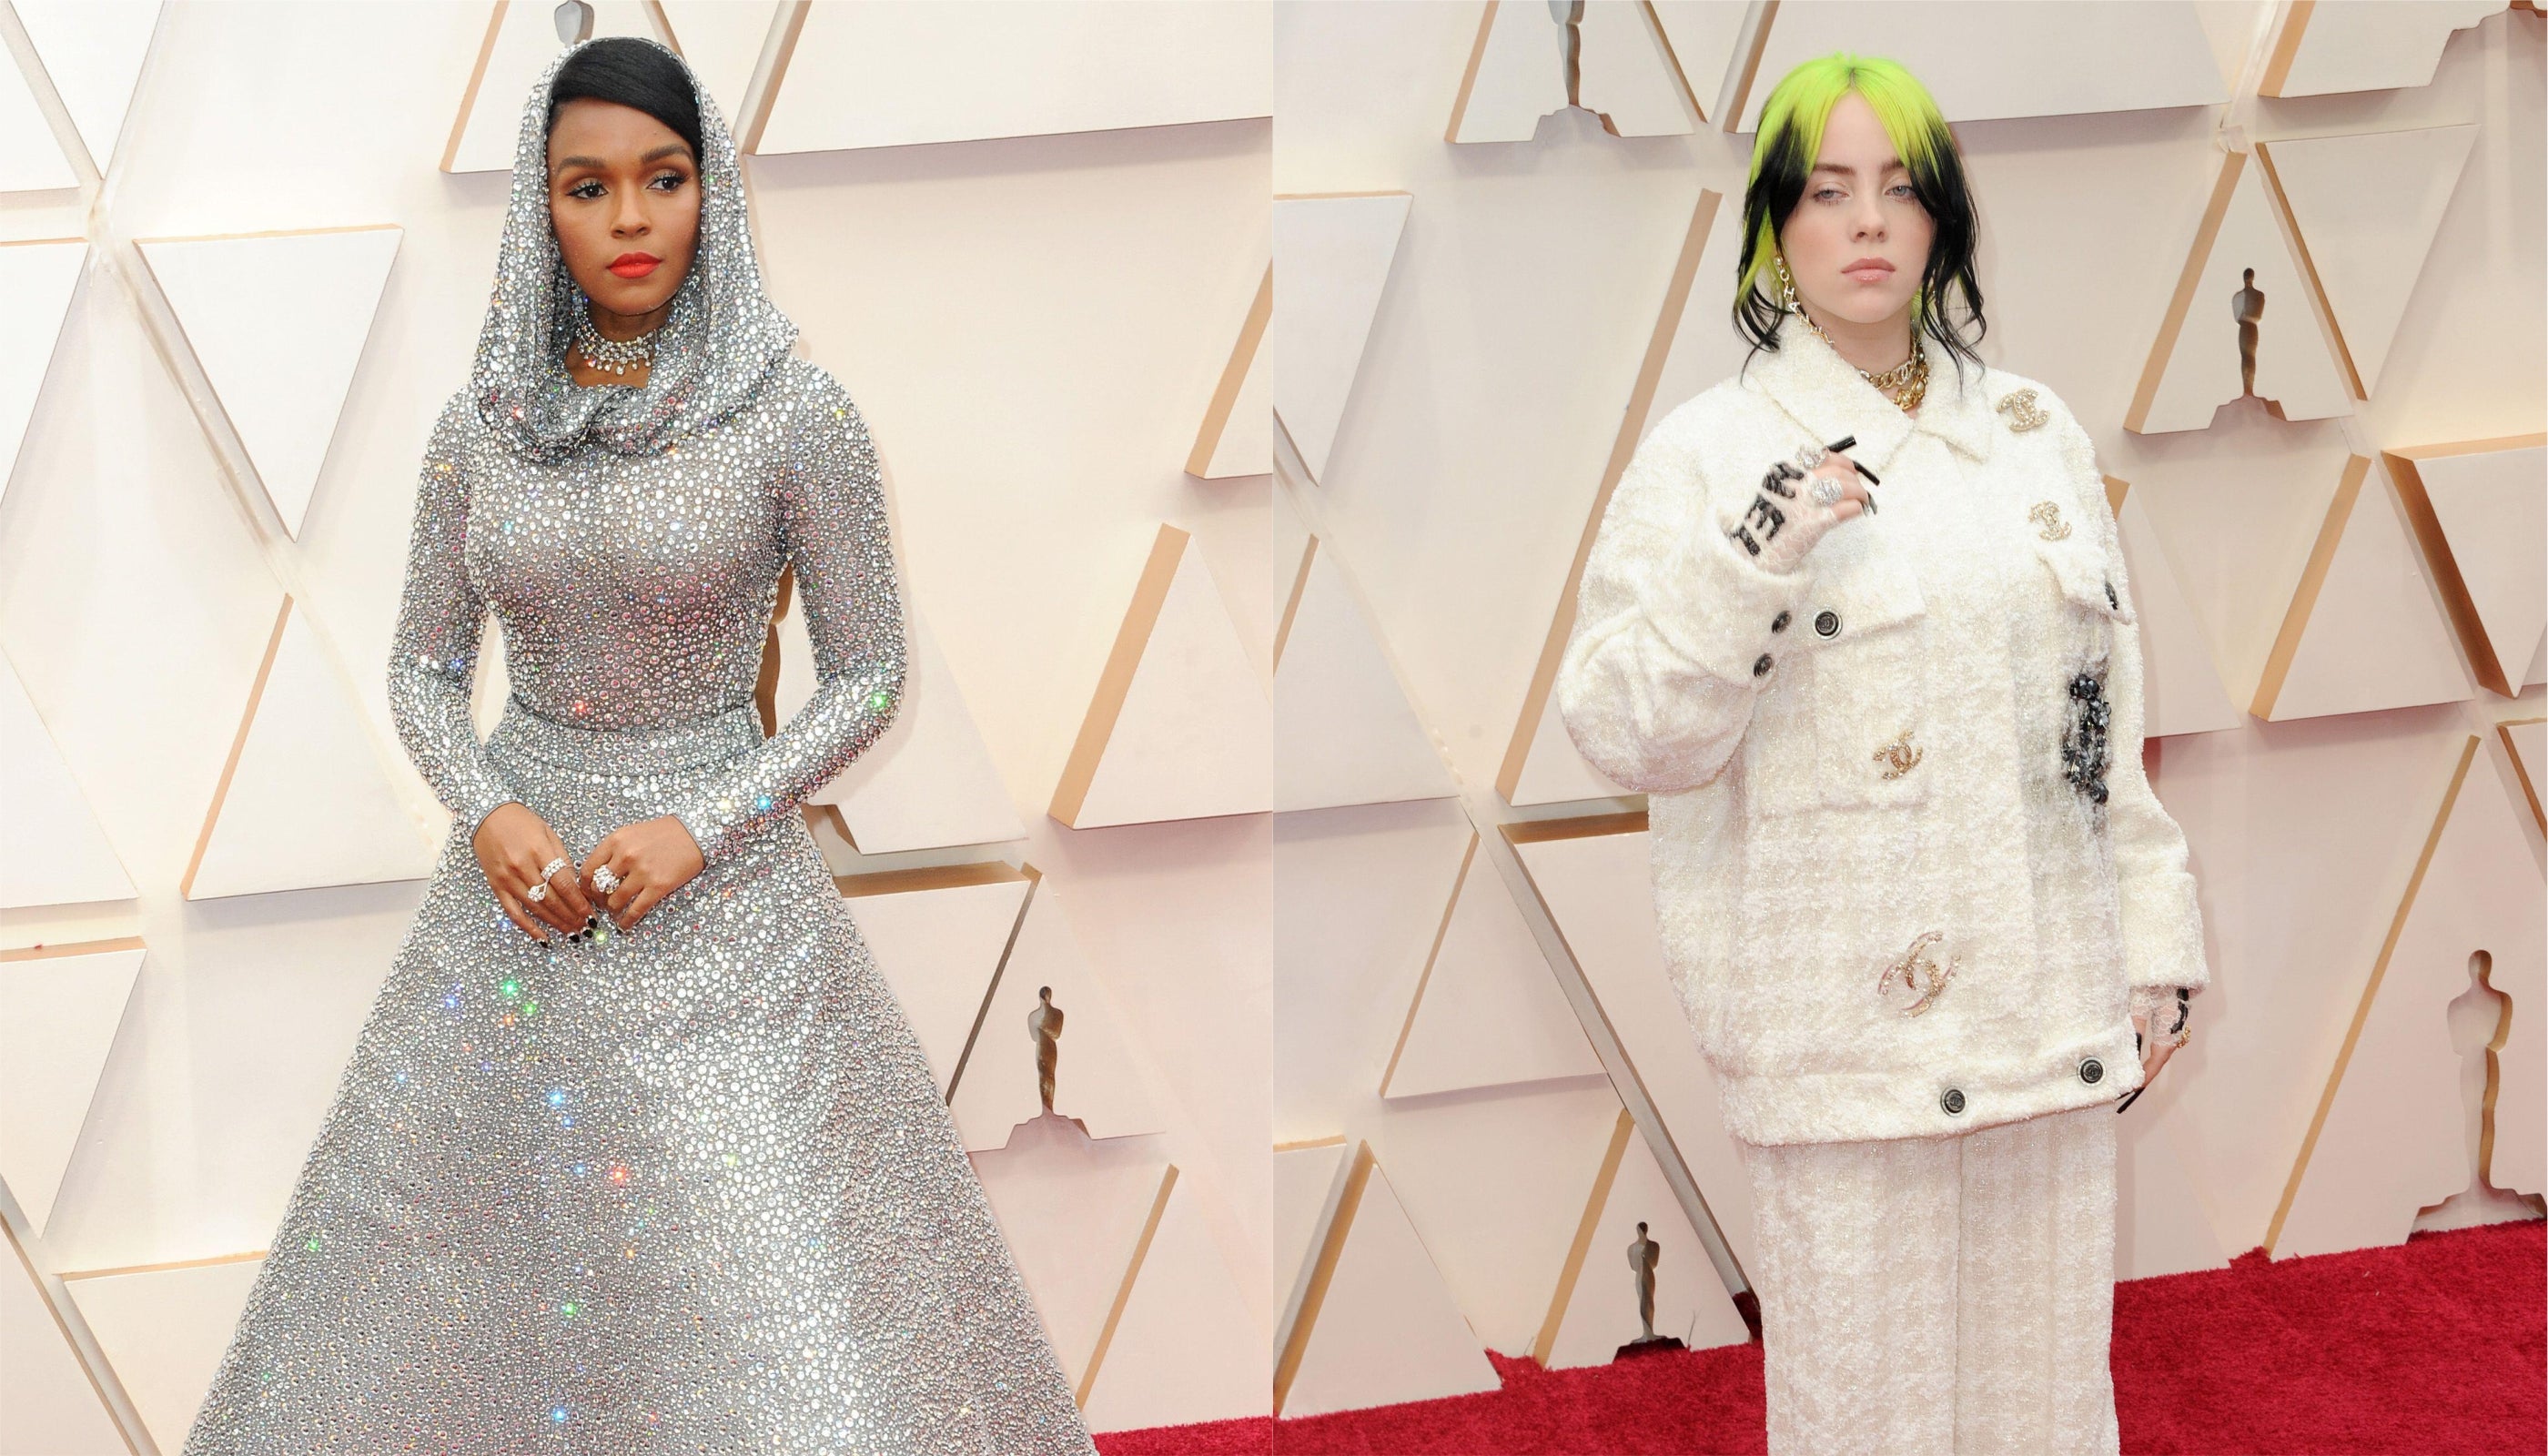 Oscars 2021 Red Carpet: A Guide to How to Watch and Best Looks